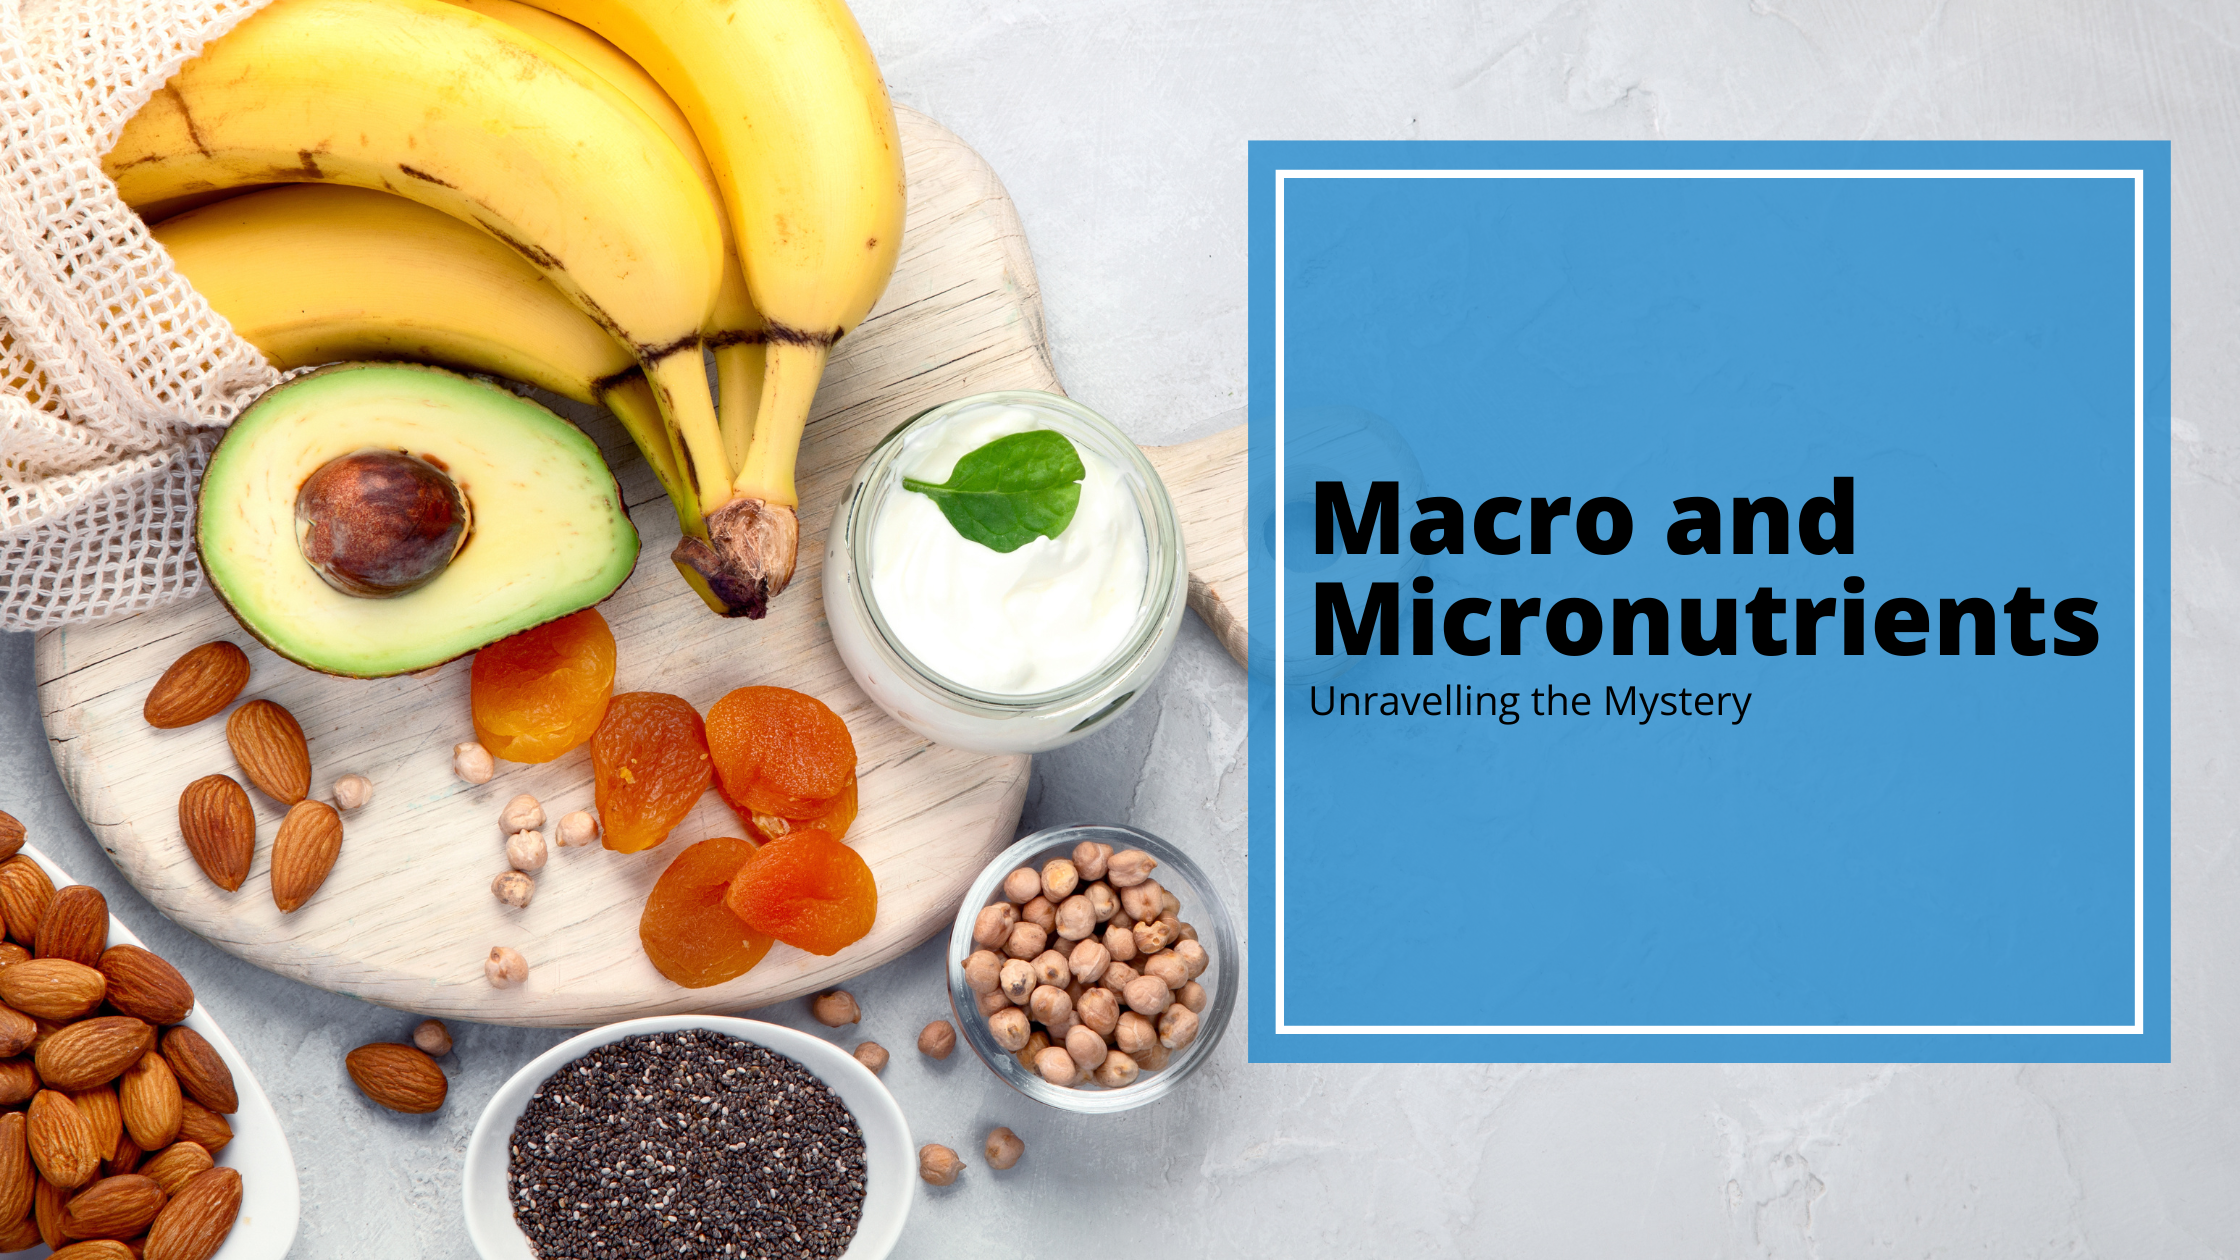 Unraveling the Mystery of Macro and Micronutrients